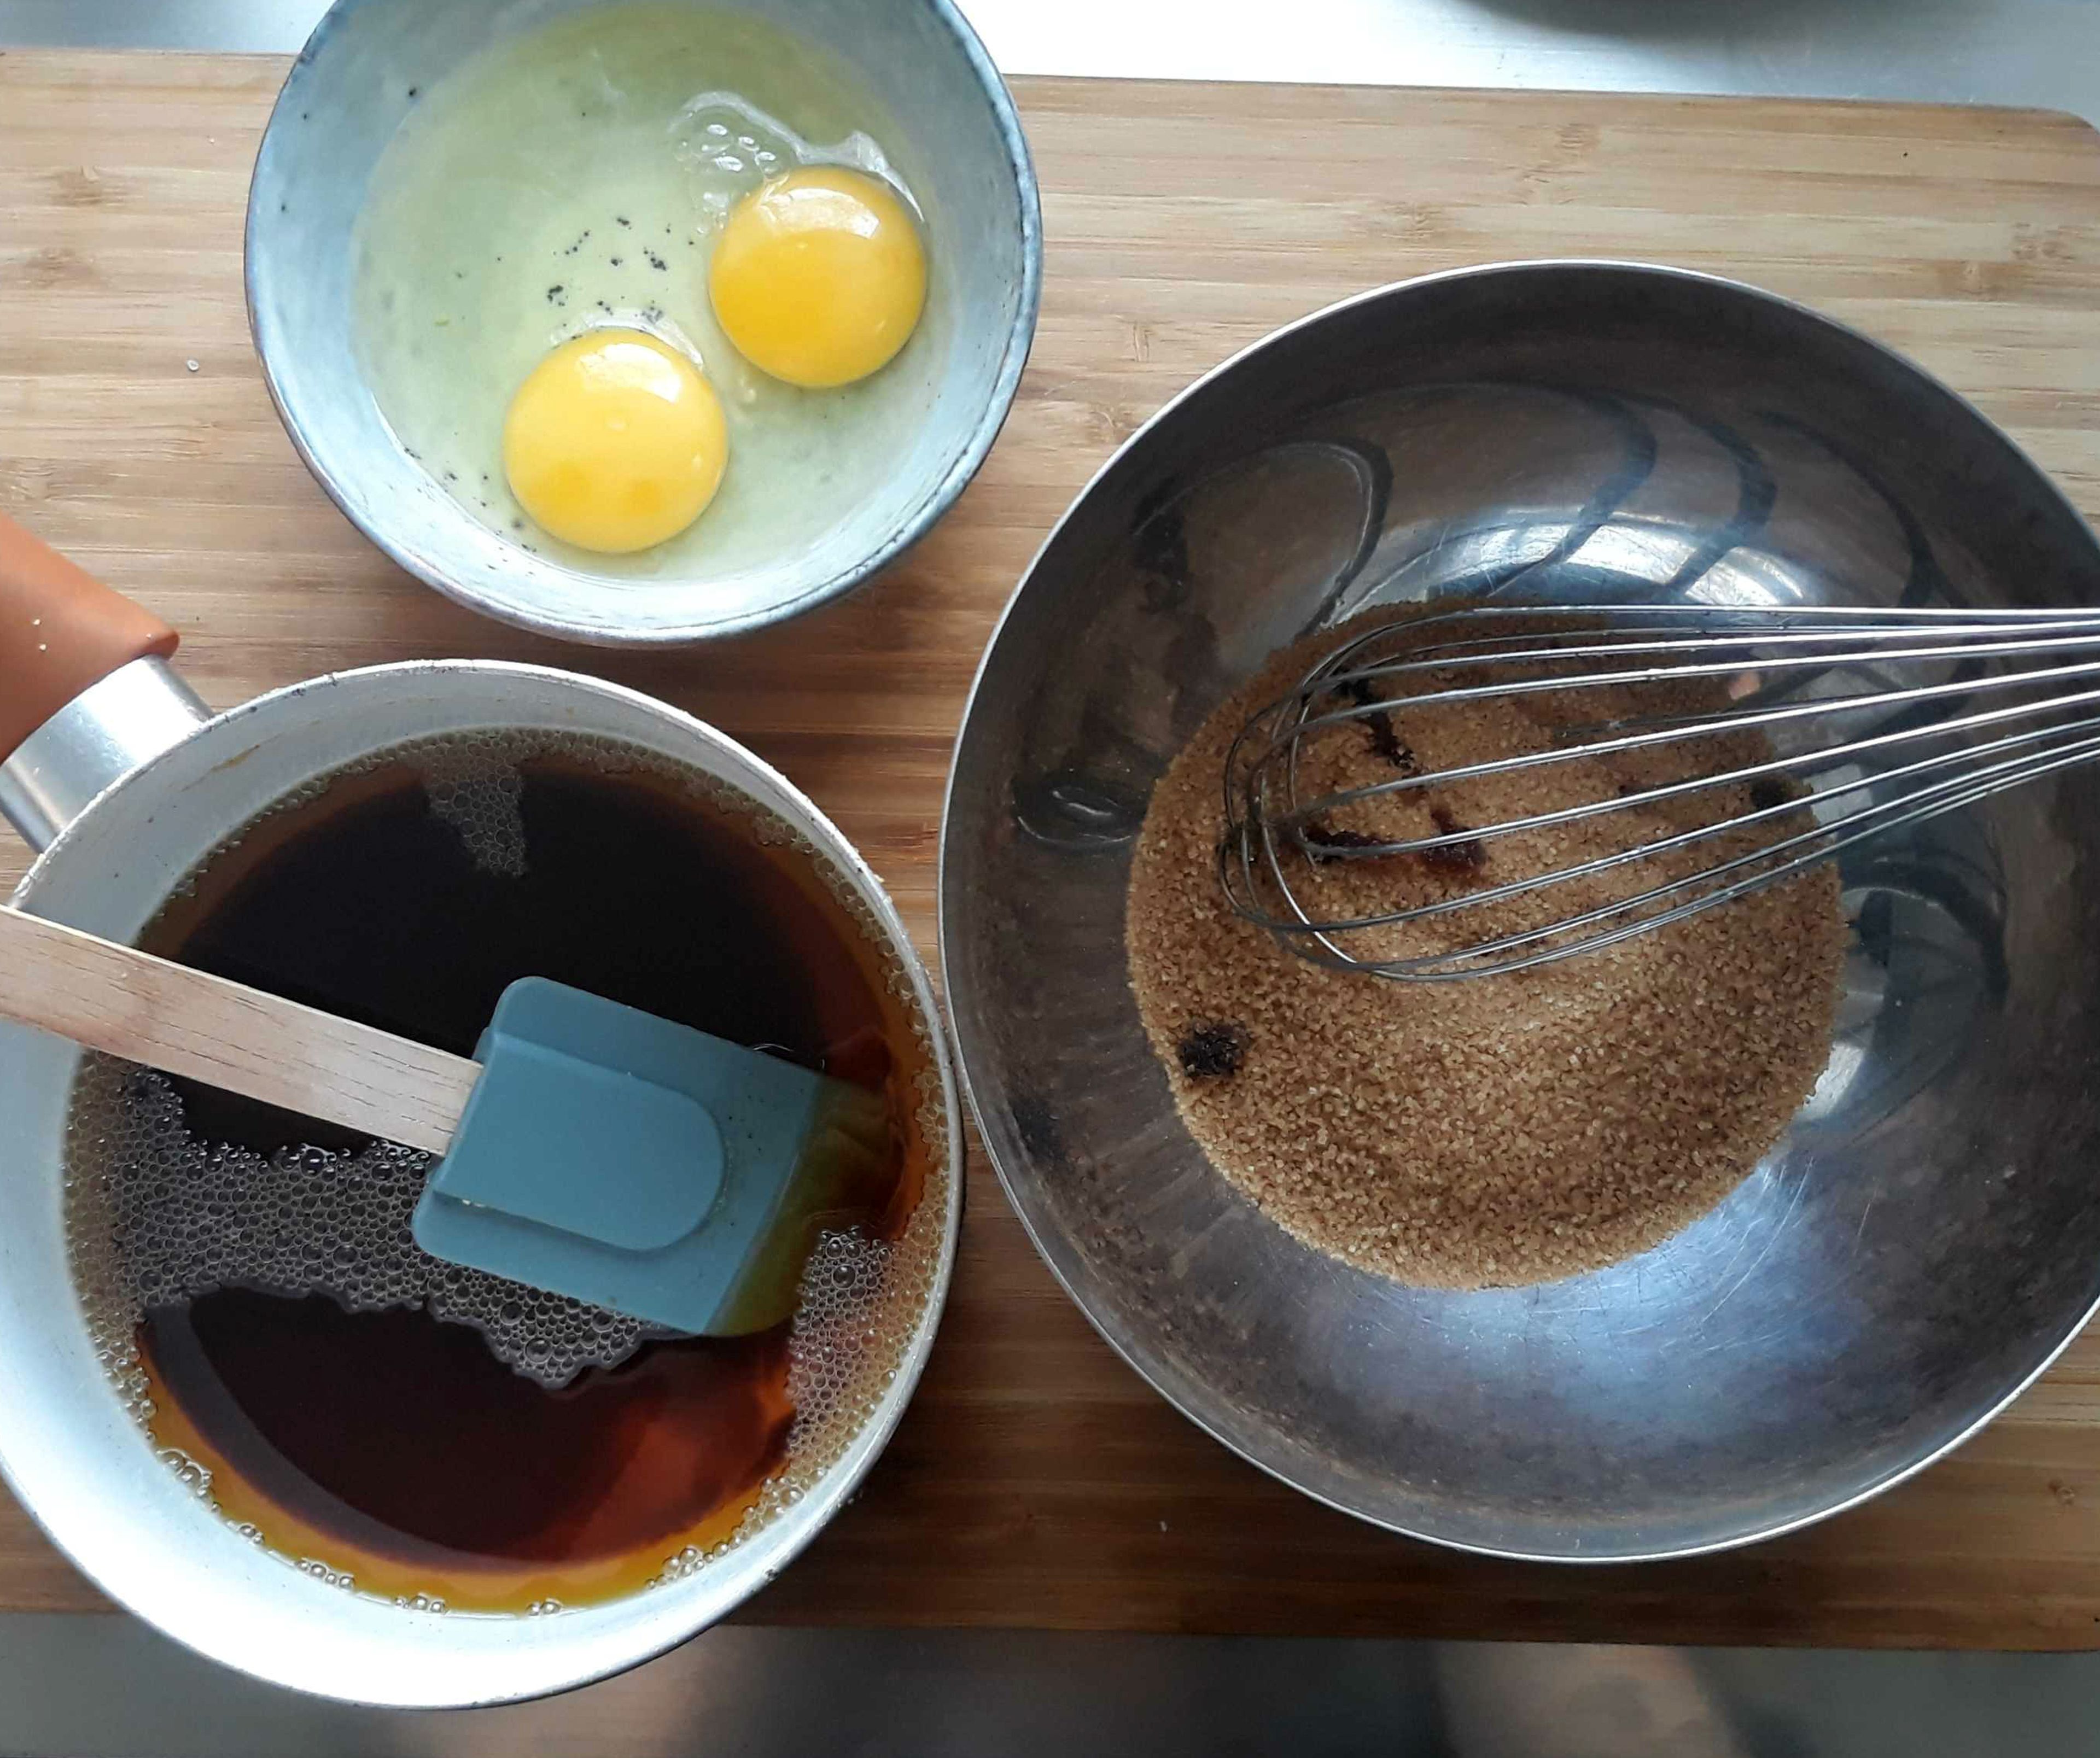 Melt and brown butter in a saucepan or small frying pan. Pour brown butter over raw sugar, then mix thoroughly. Add vanilla extract and eggs and stir to combine.